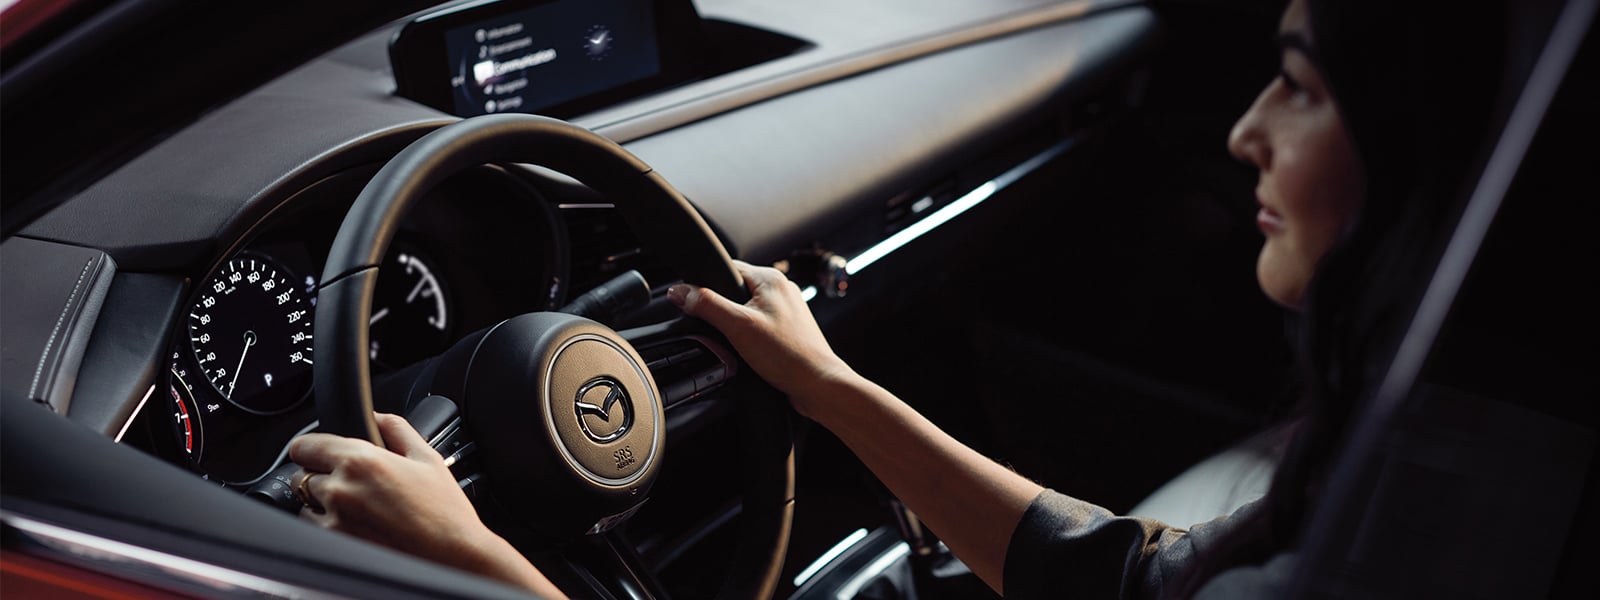 Interior over-the-shoulder shot of woman with hands at 10 and 2 on the wheel with the Mazda logo catching the light.